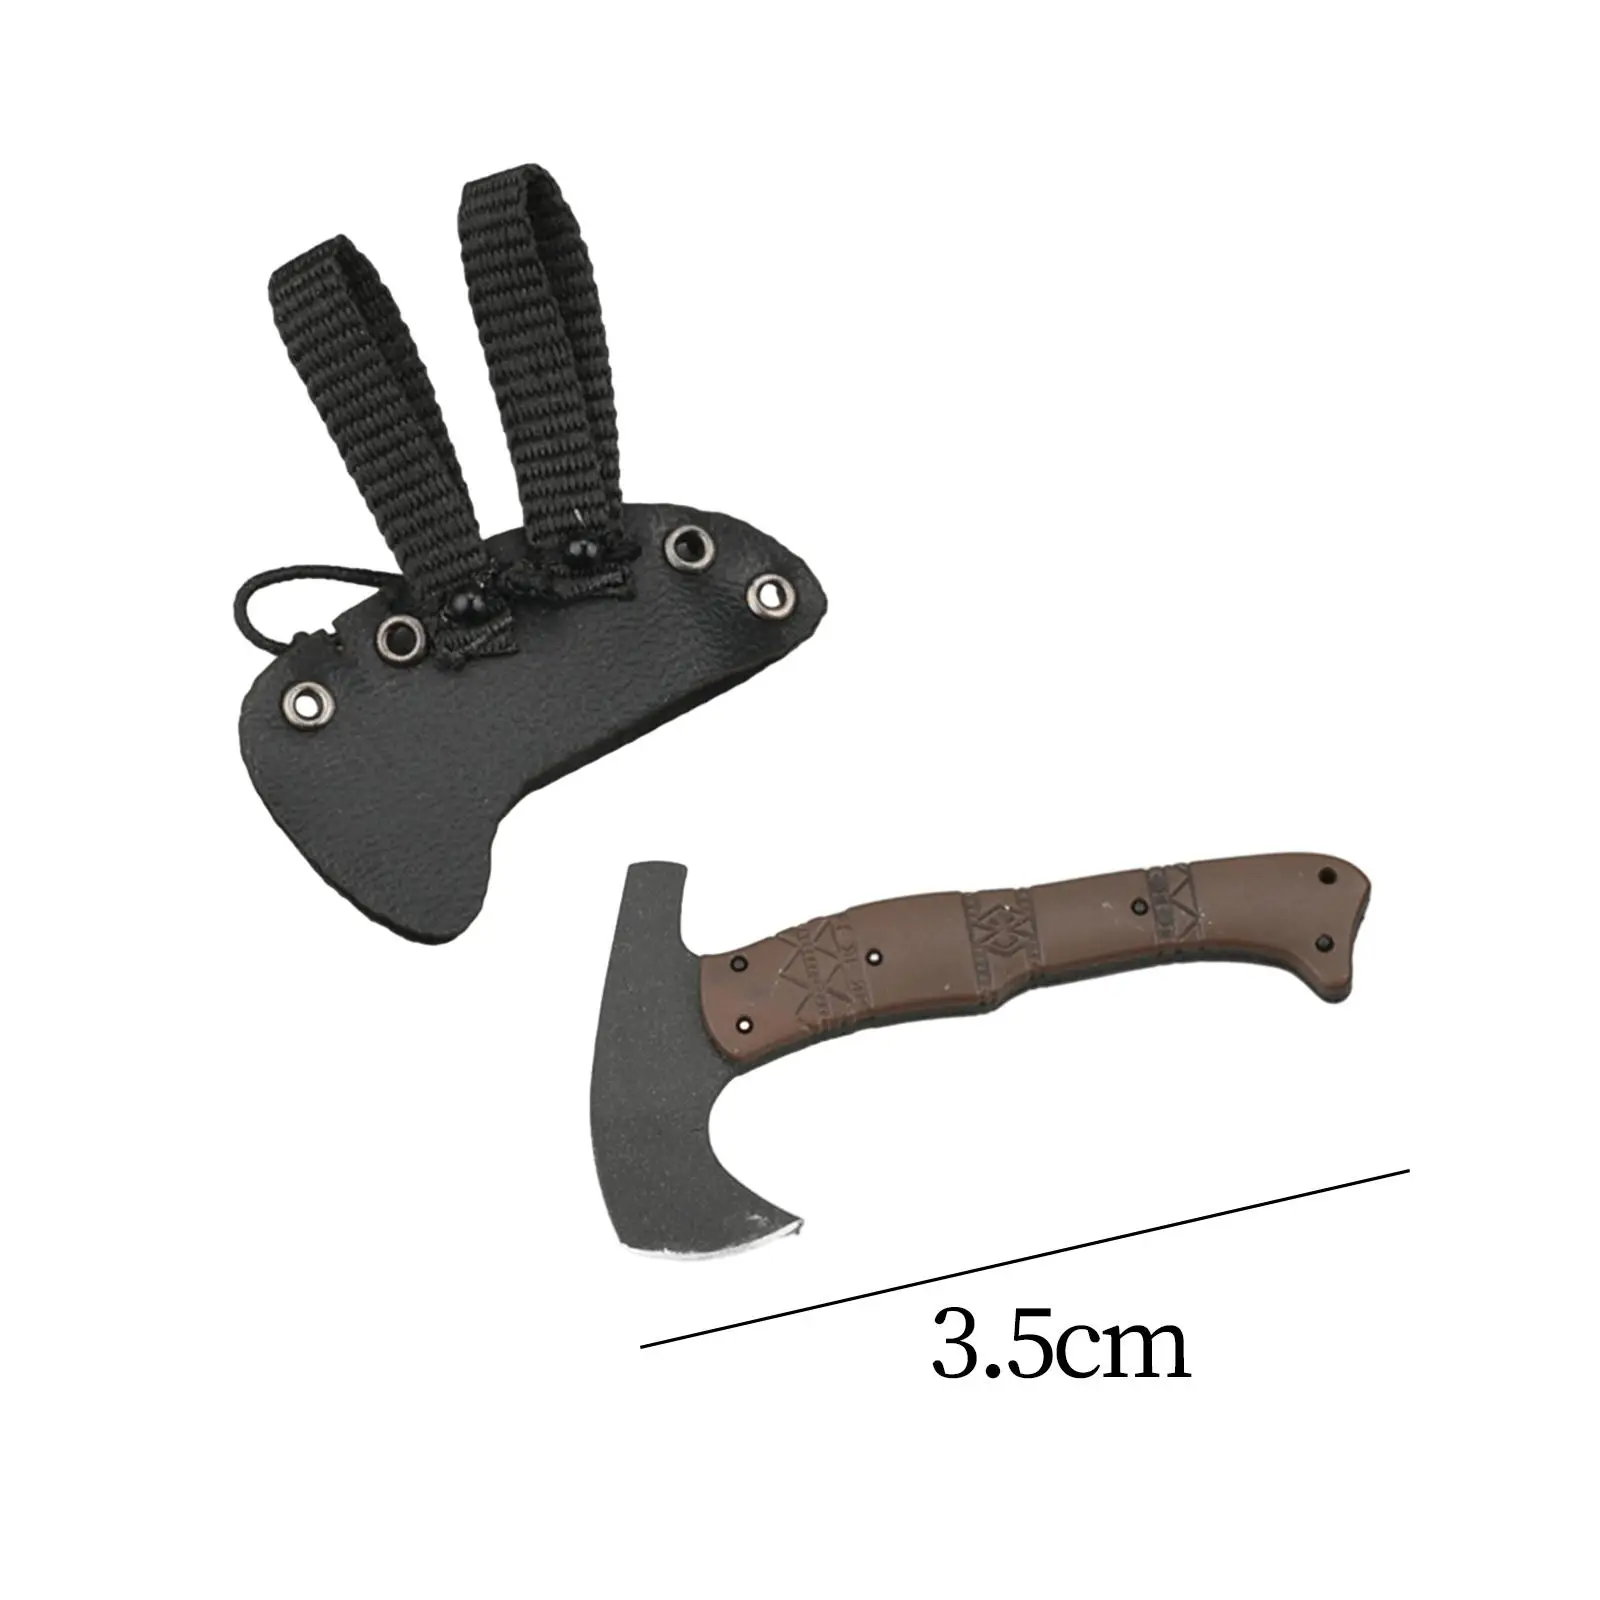 1:6 Hatchet Toy 1/6 Scale Axe Model Play House Decorative Miniature Ornament Mini Axe for Club Presents Bedroom Kids Children